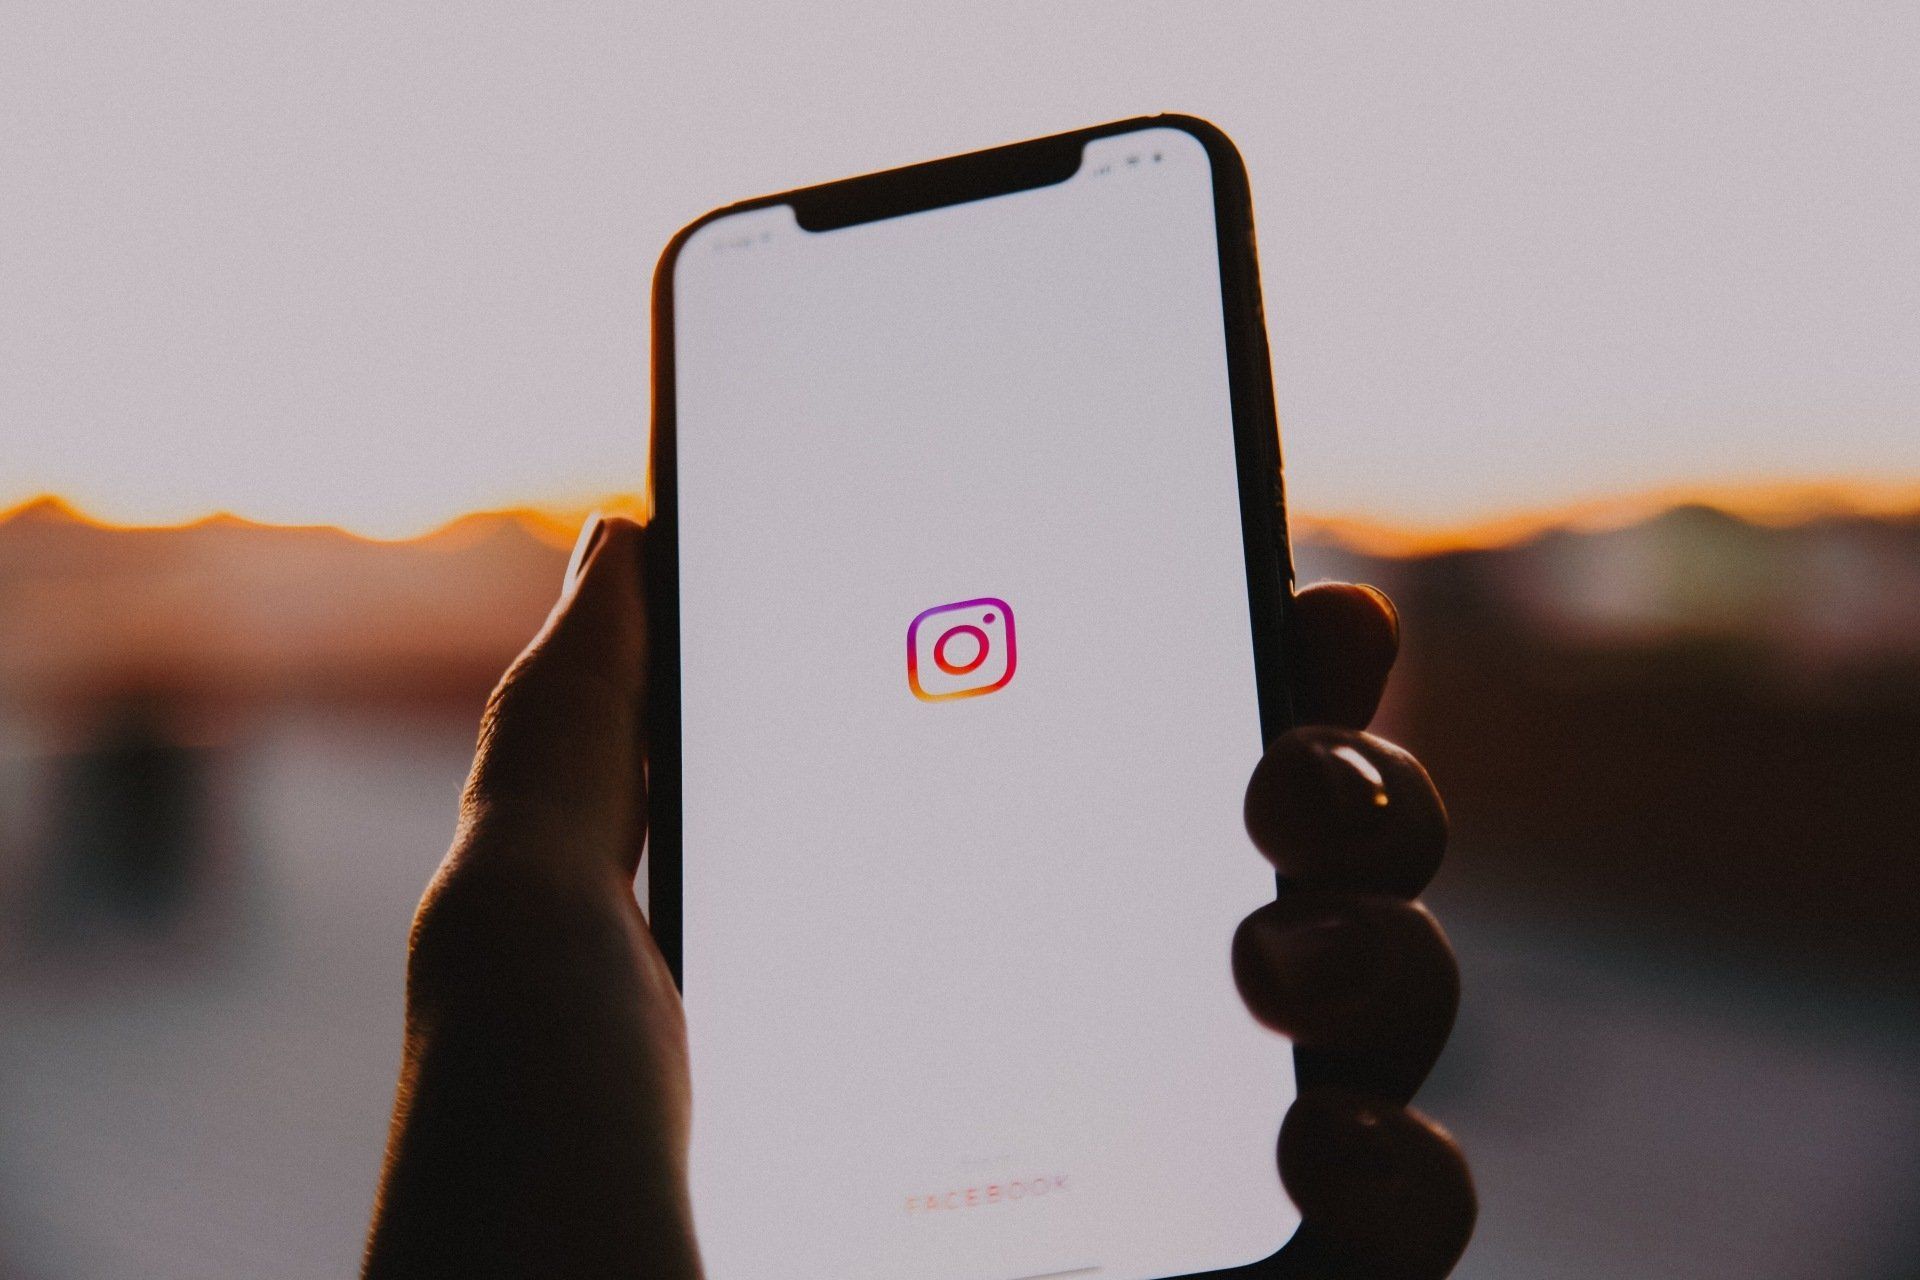 9 Instagram Caption Ideas to Level Up Your Social Media Game